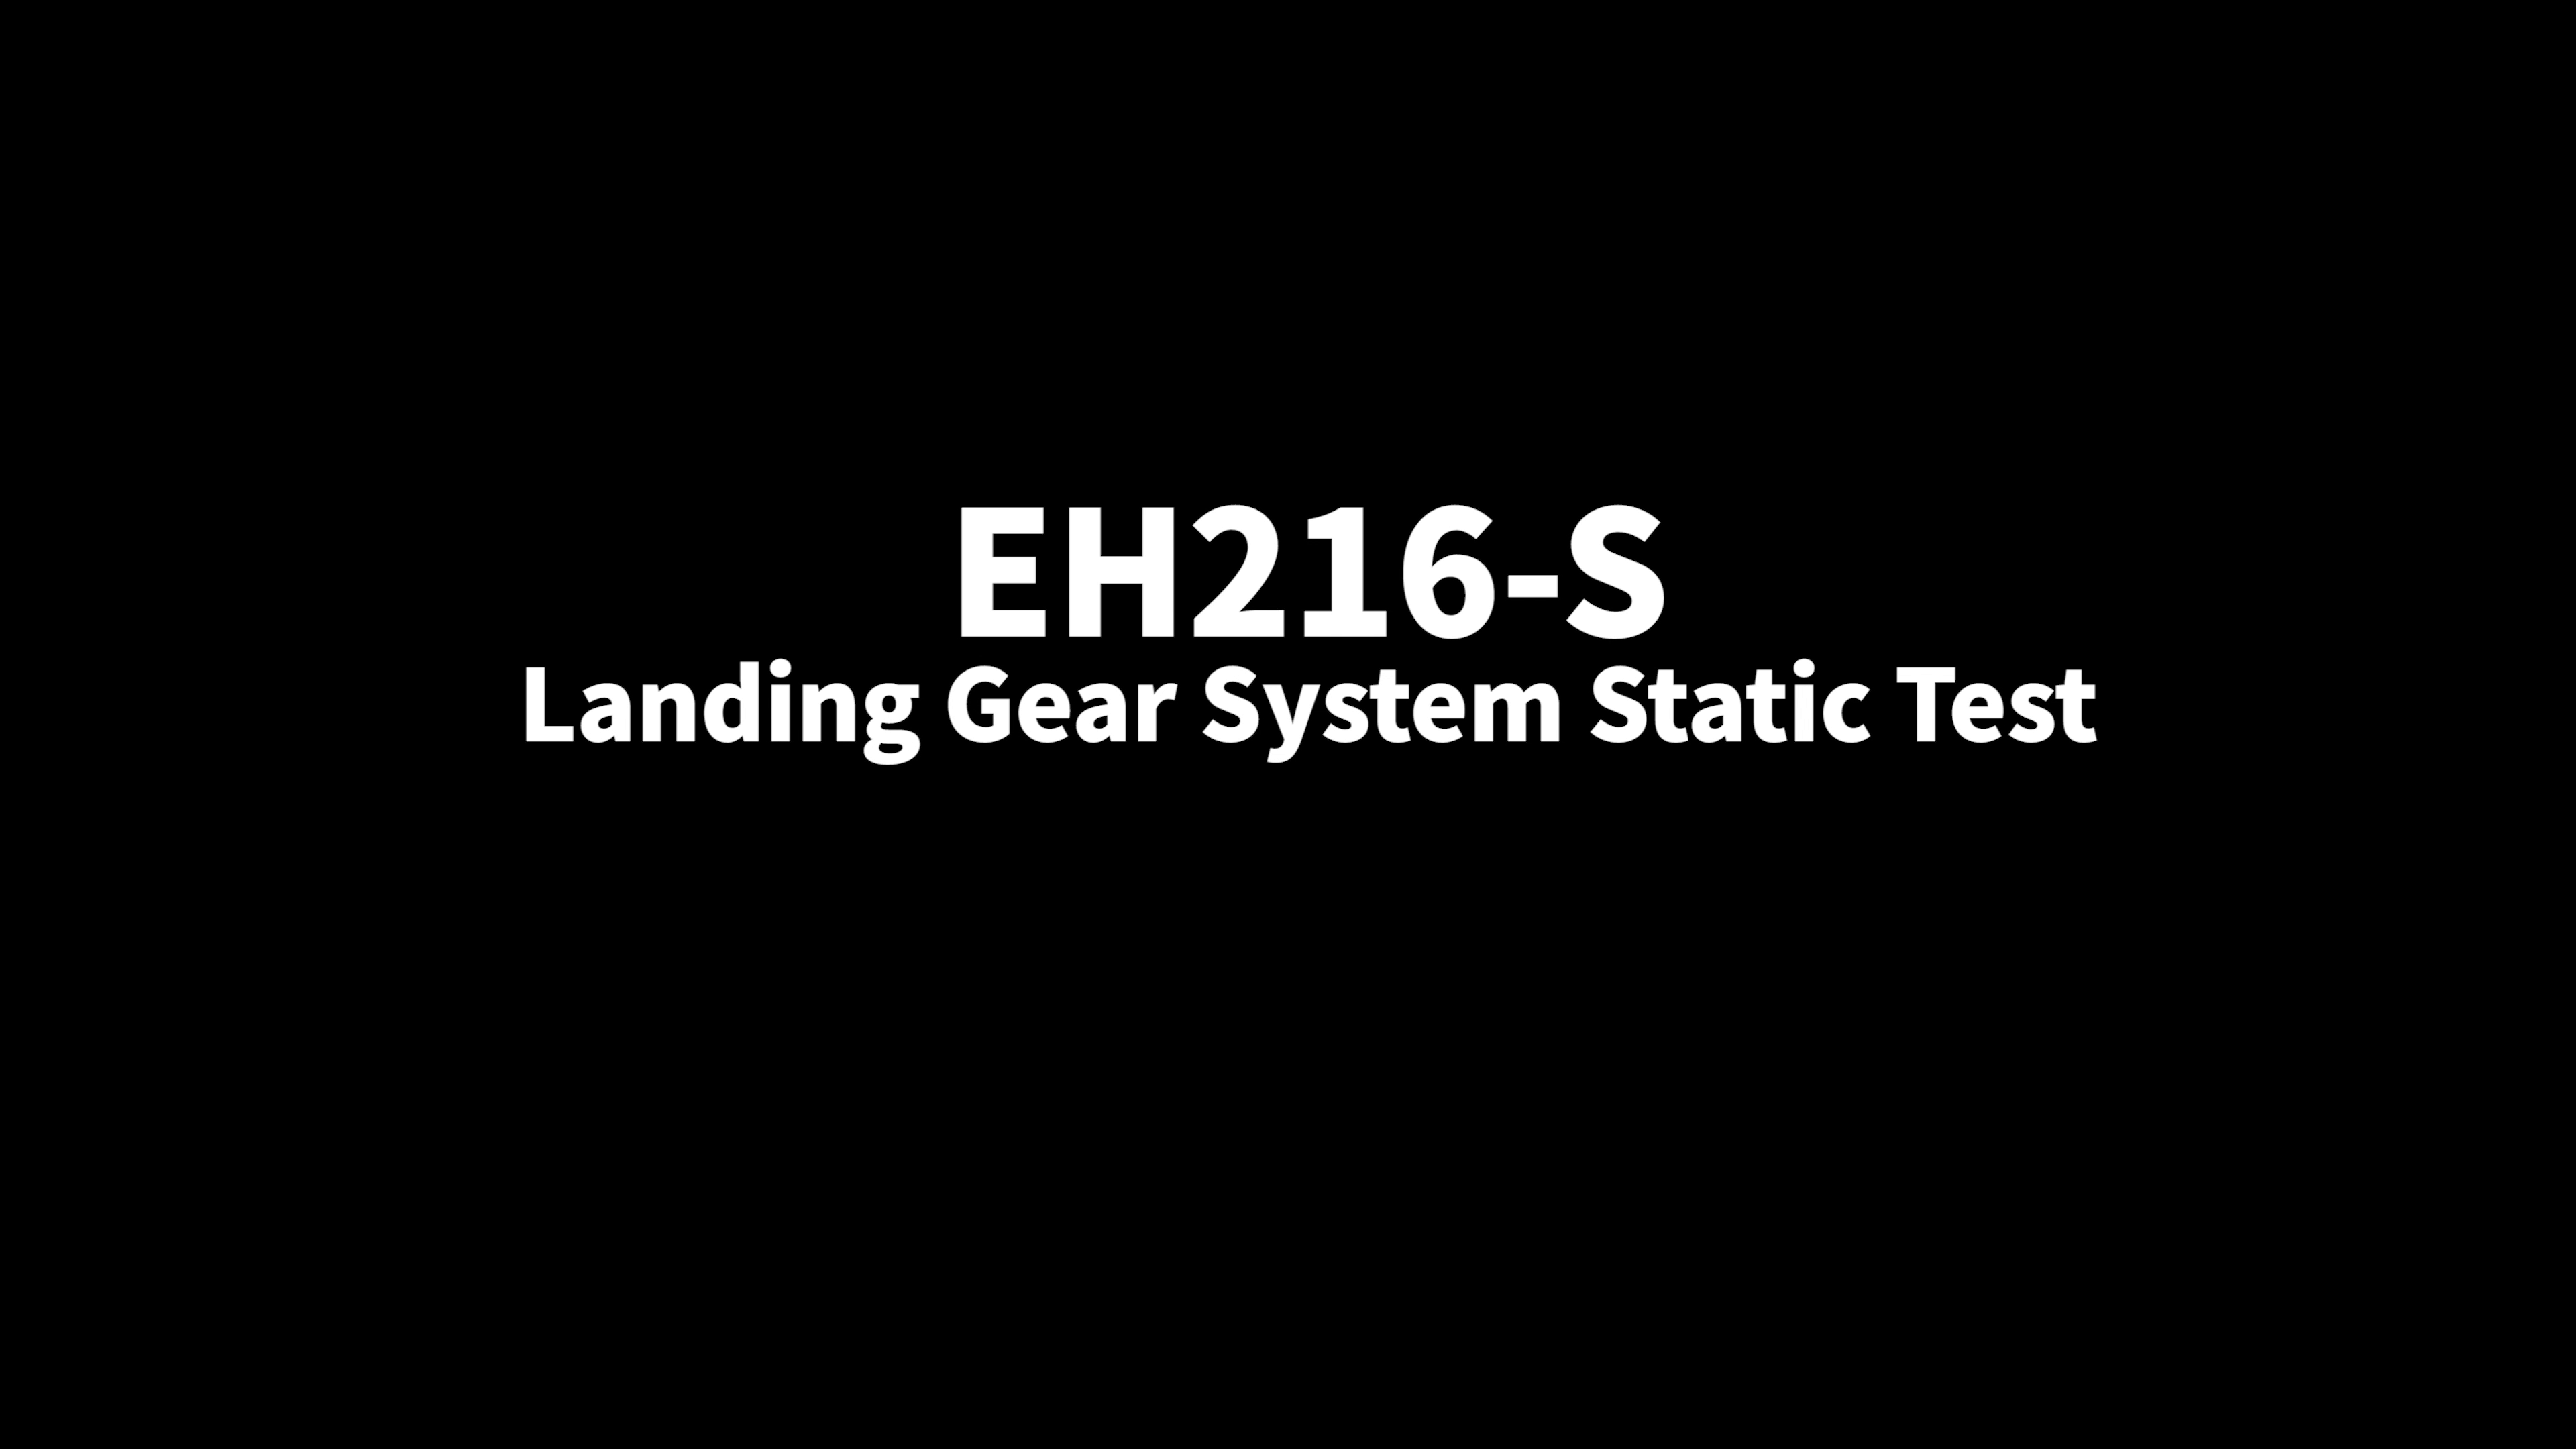 TC Experiment Highlights:EH216-S Landing Gear System Static Test